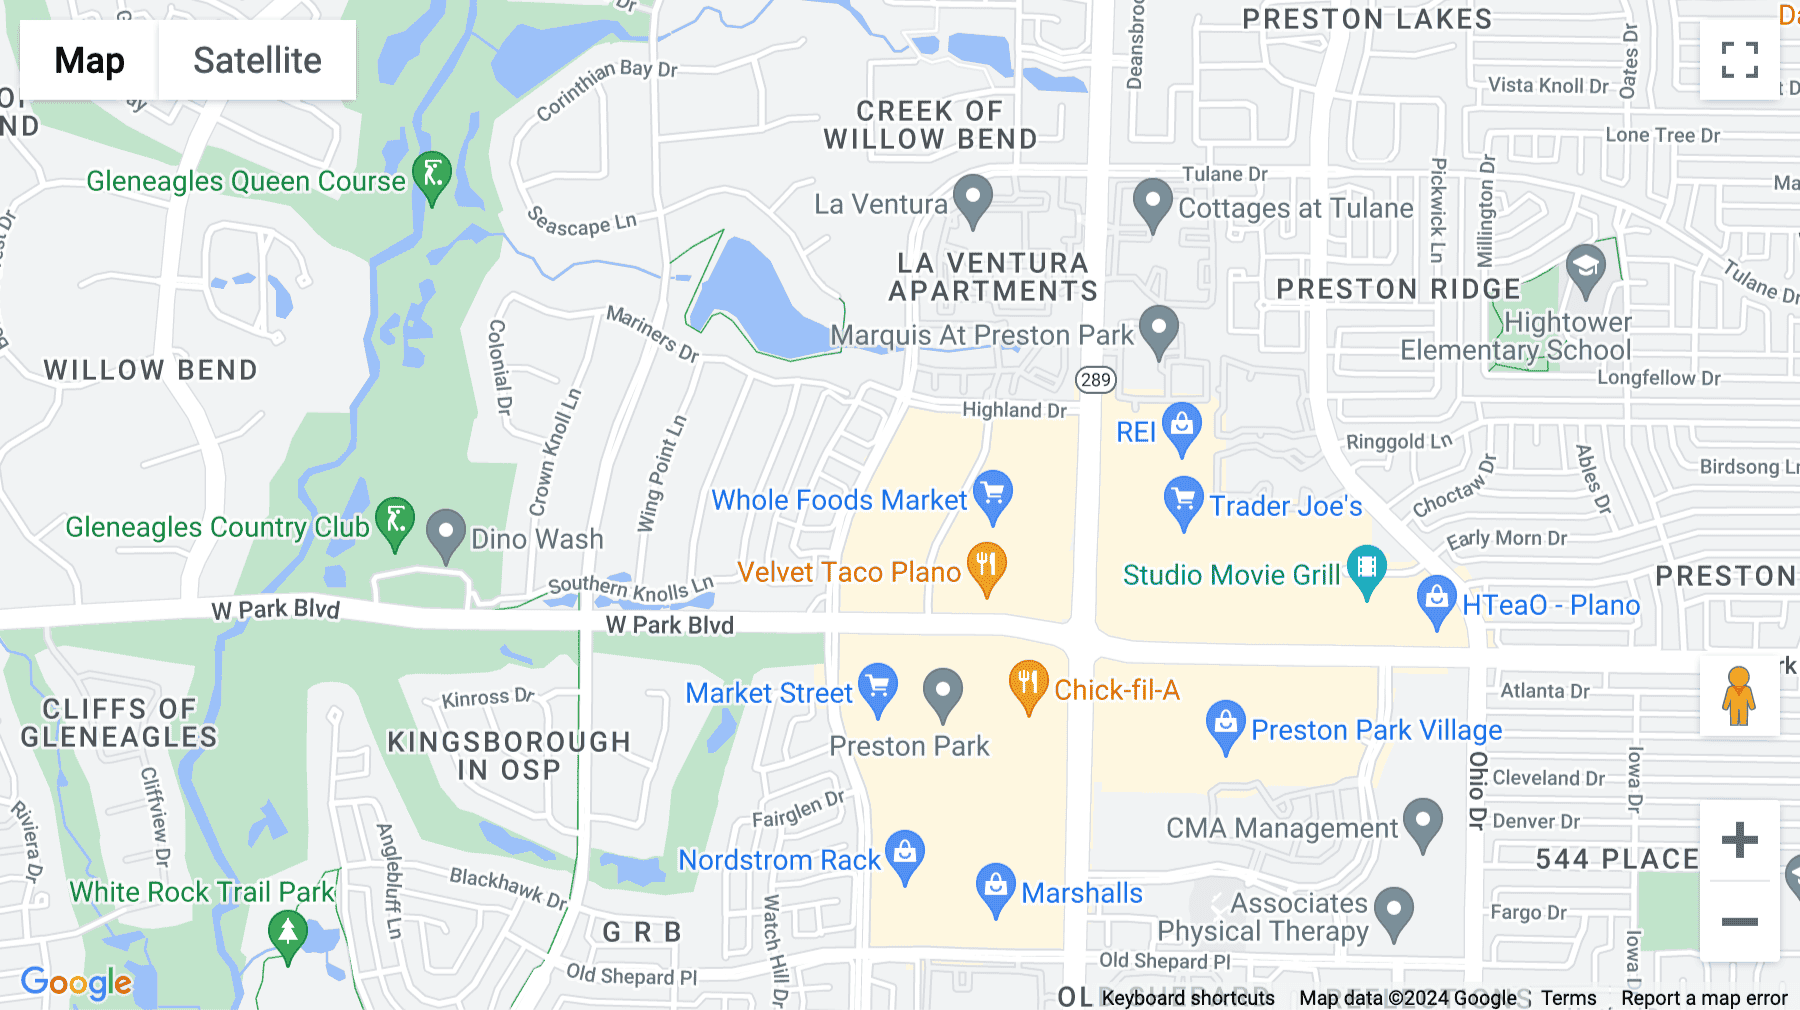 Click for interative map of 5055 W. Park Blvd, Suite 400, Plano